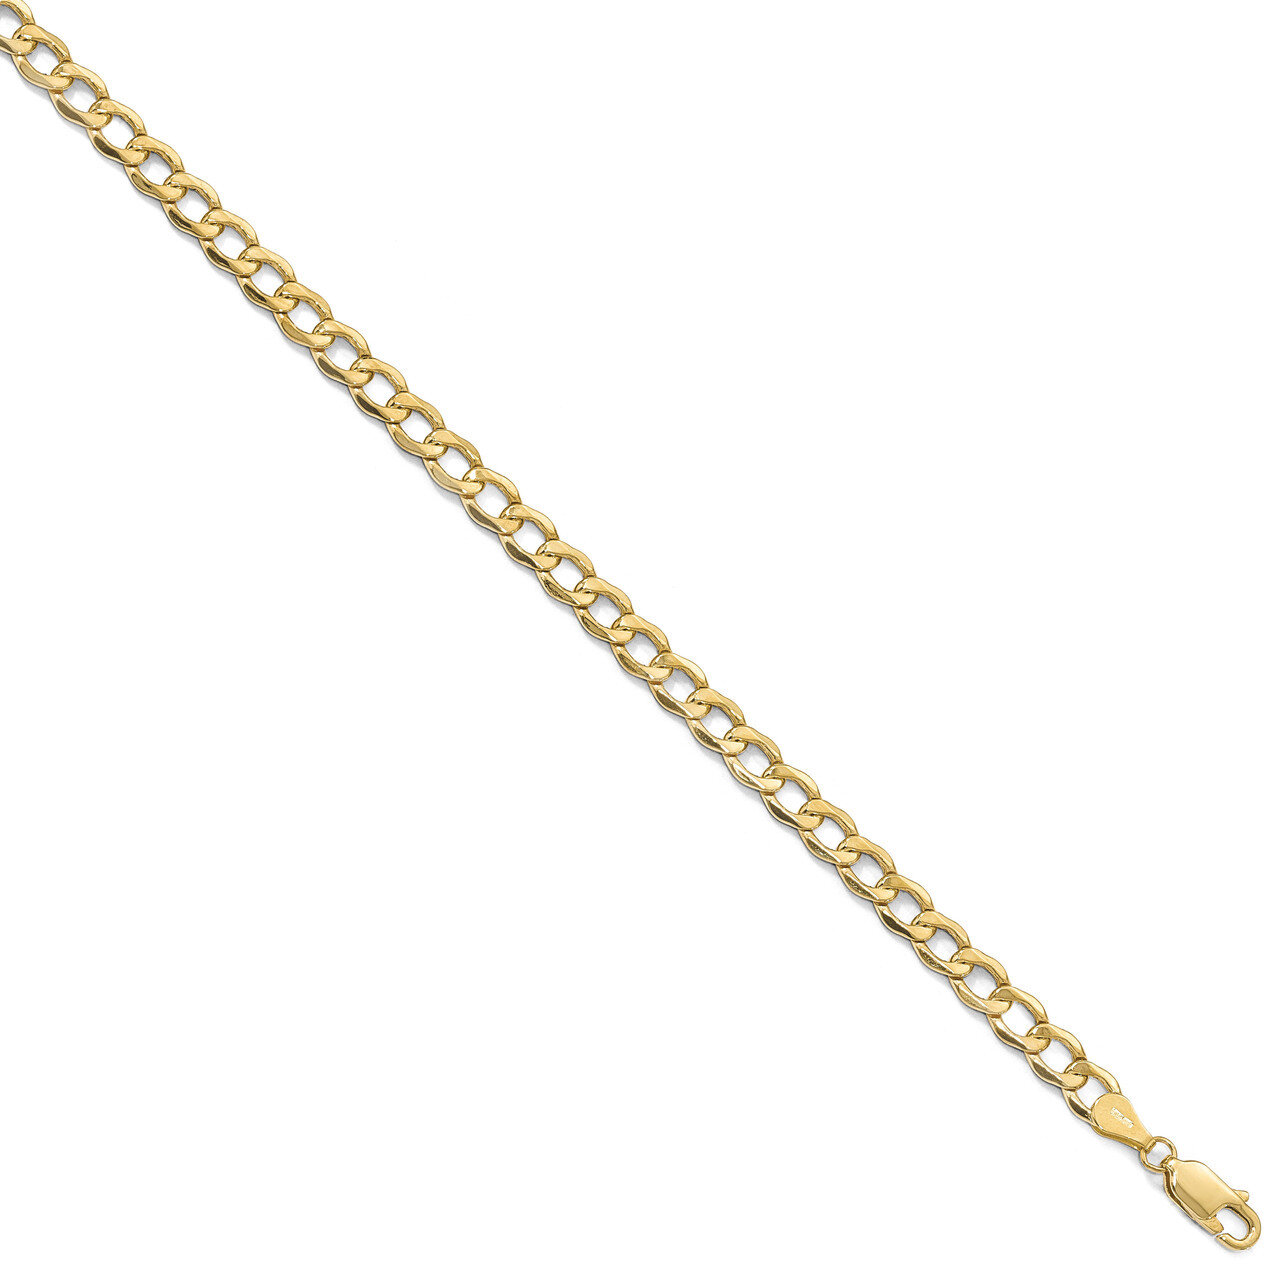 5.25mm Semi-Solid Curb Link Chain 7 Inch 10k Gold HB-8241-7